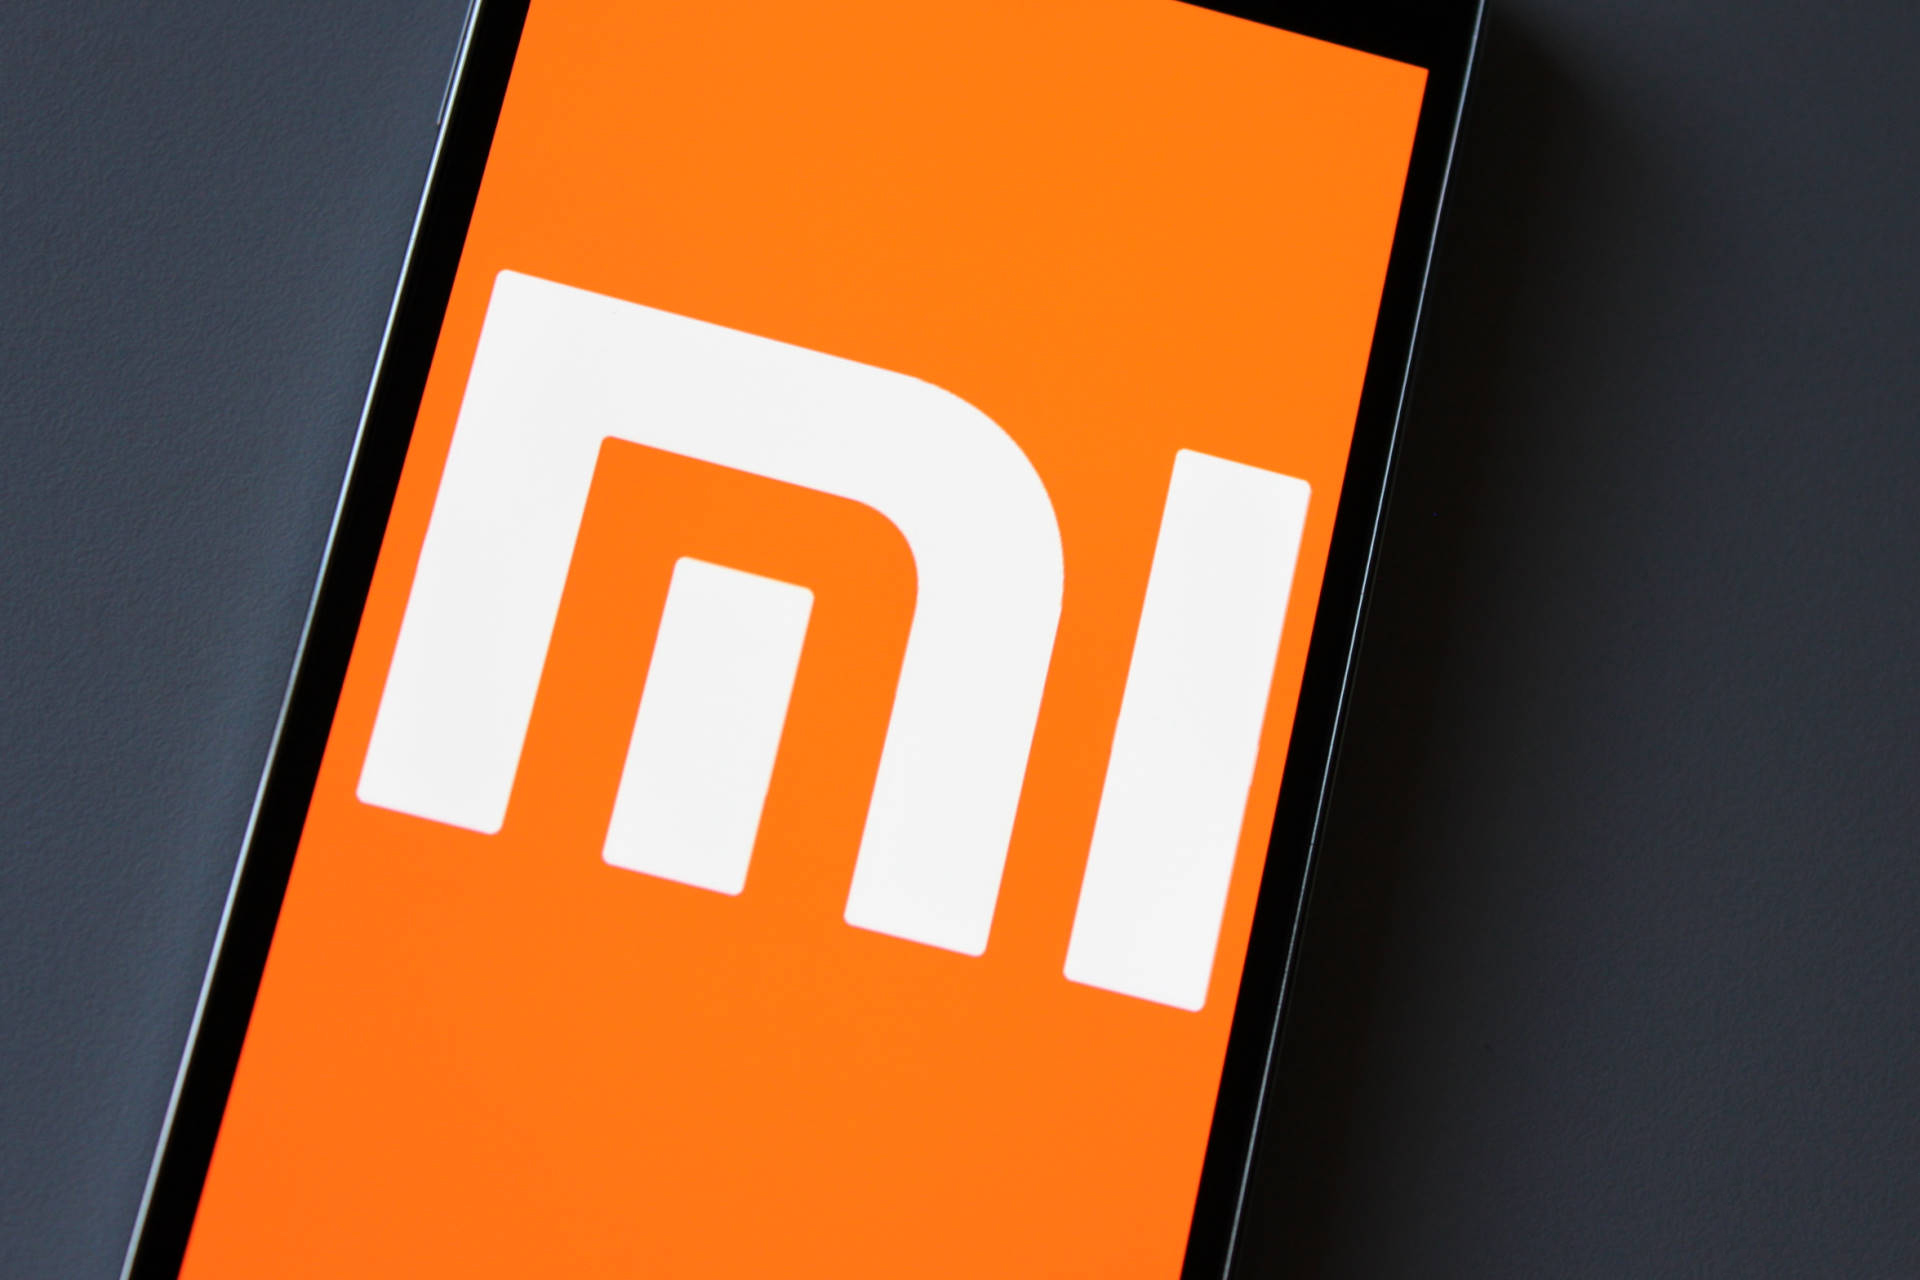 xiaomi mi 6 plus reportedly cancelled, mi note 3 launch expected in september